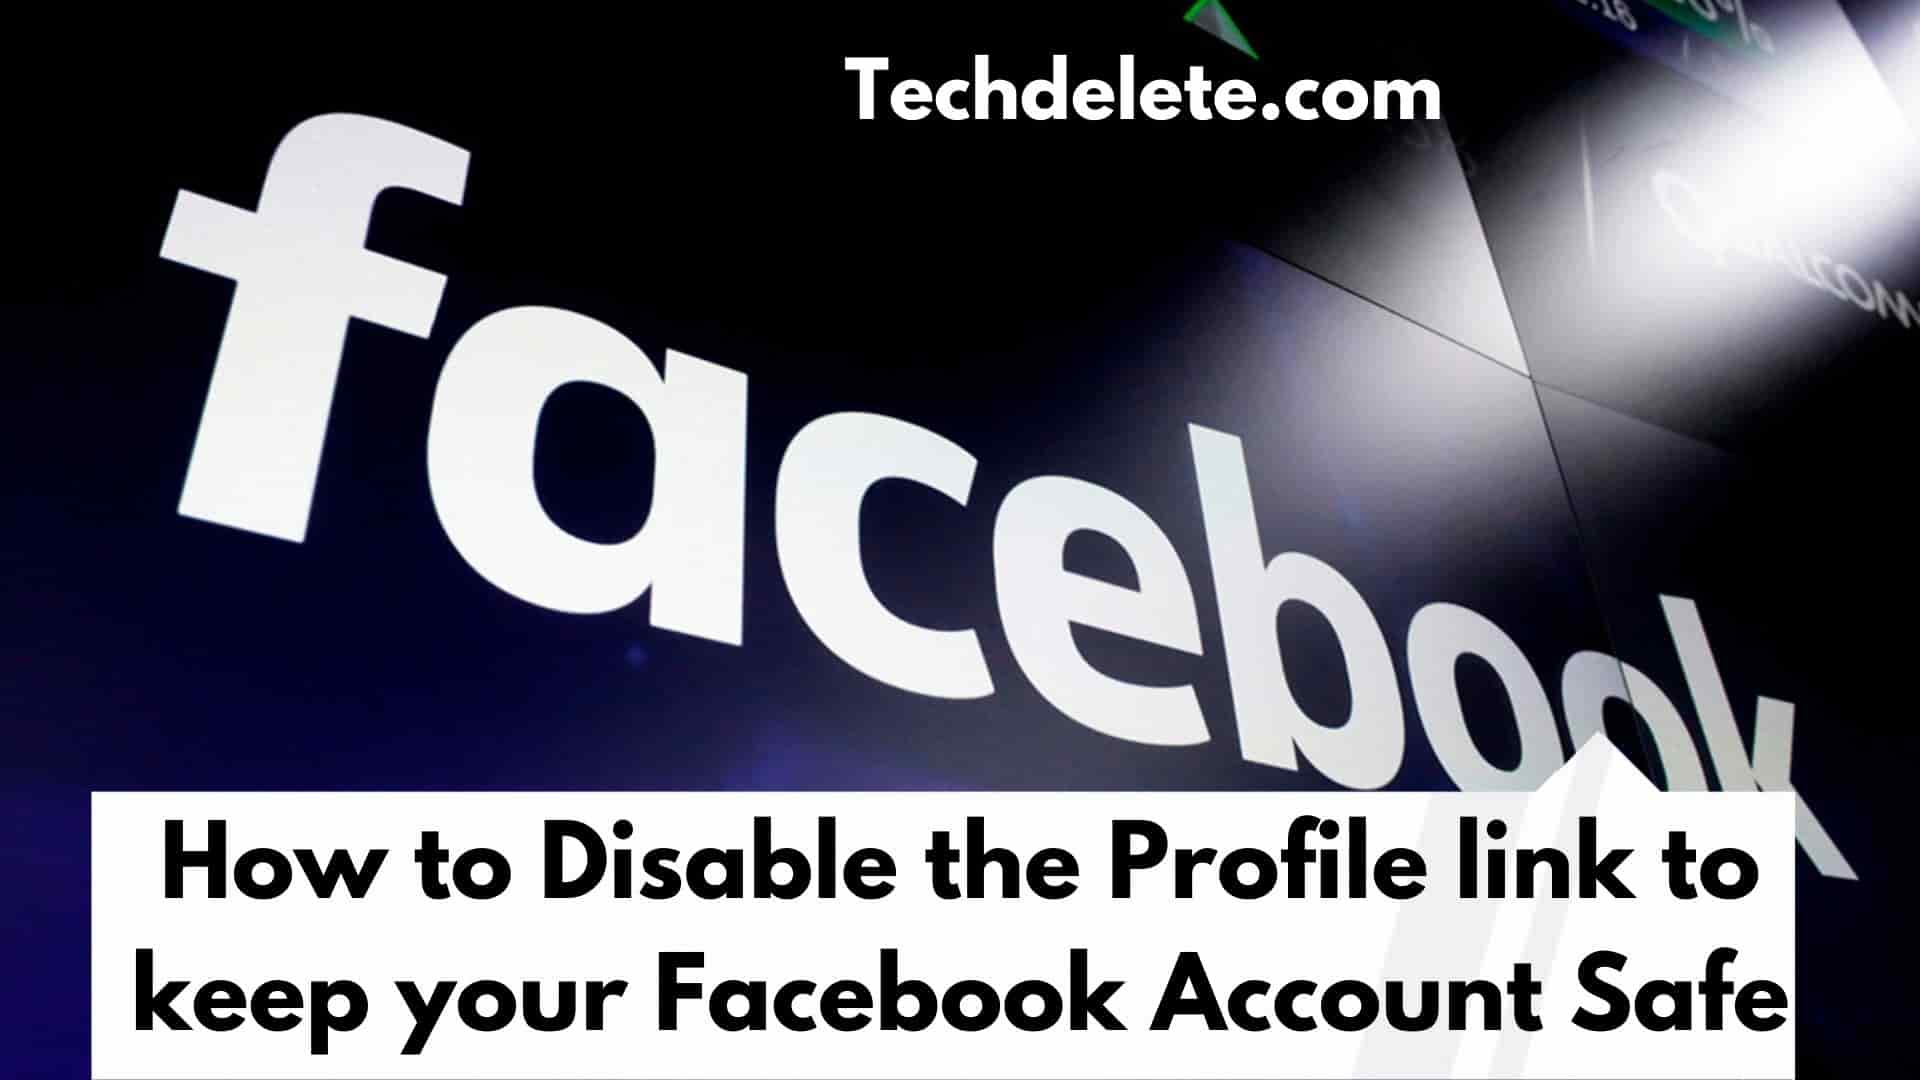 How to Disable the Profile link to keep your Facebook Account Safe